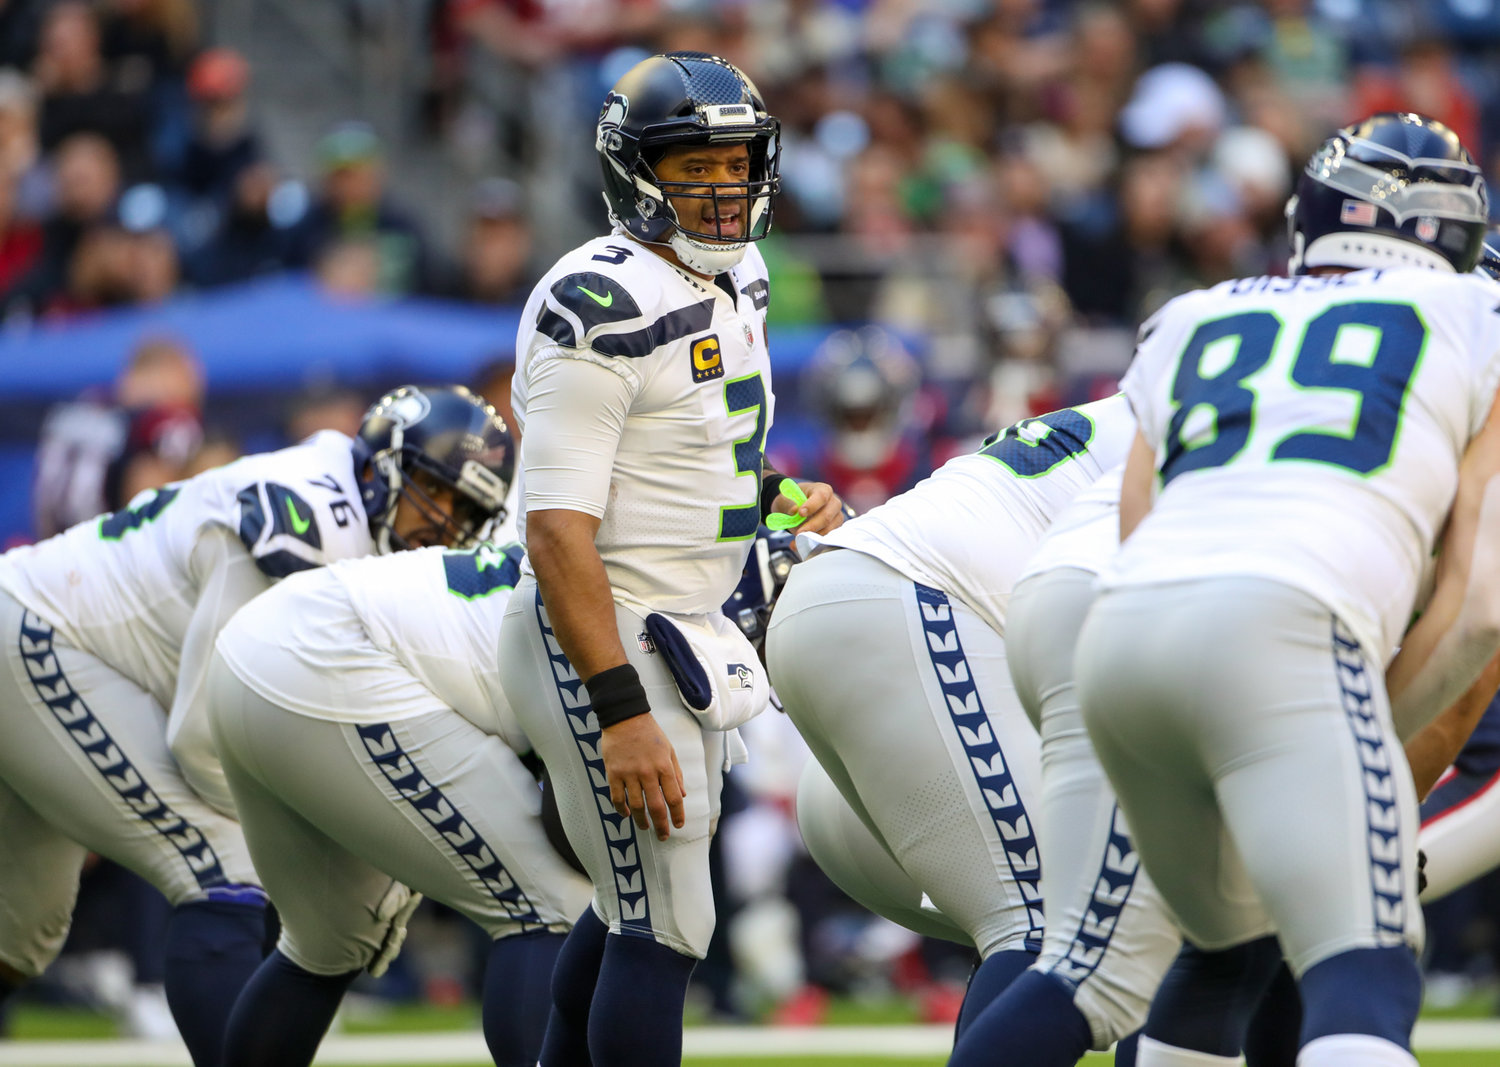 Seattle Seahawks quarterback Russell Wilson (3) at the line of scrimmage during the second half of an NFL game between the Seahawks and the Texans on December 12, 2021 in Houston, Texas.